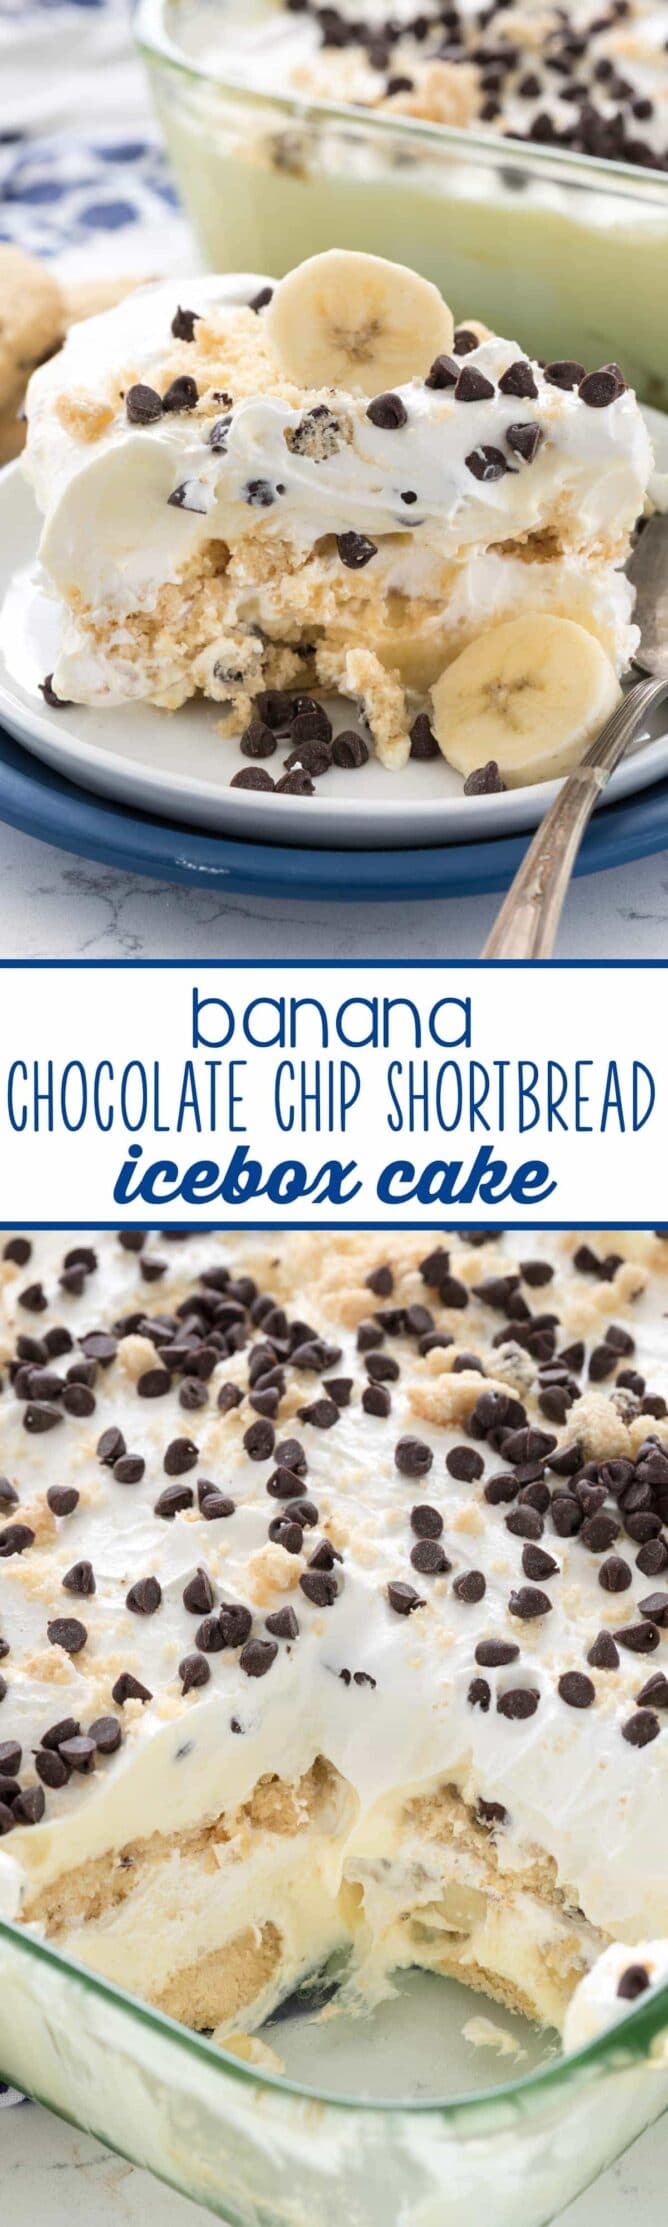 Banana chocolate chip shortbread icebox cake photo collage with words in the middle